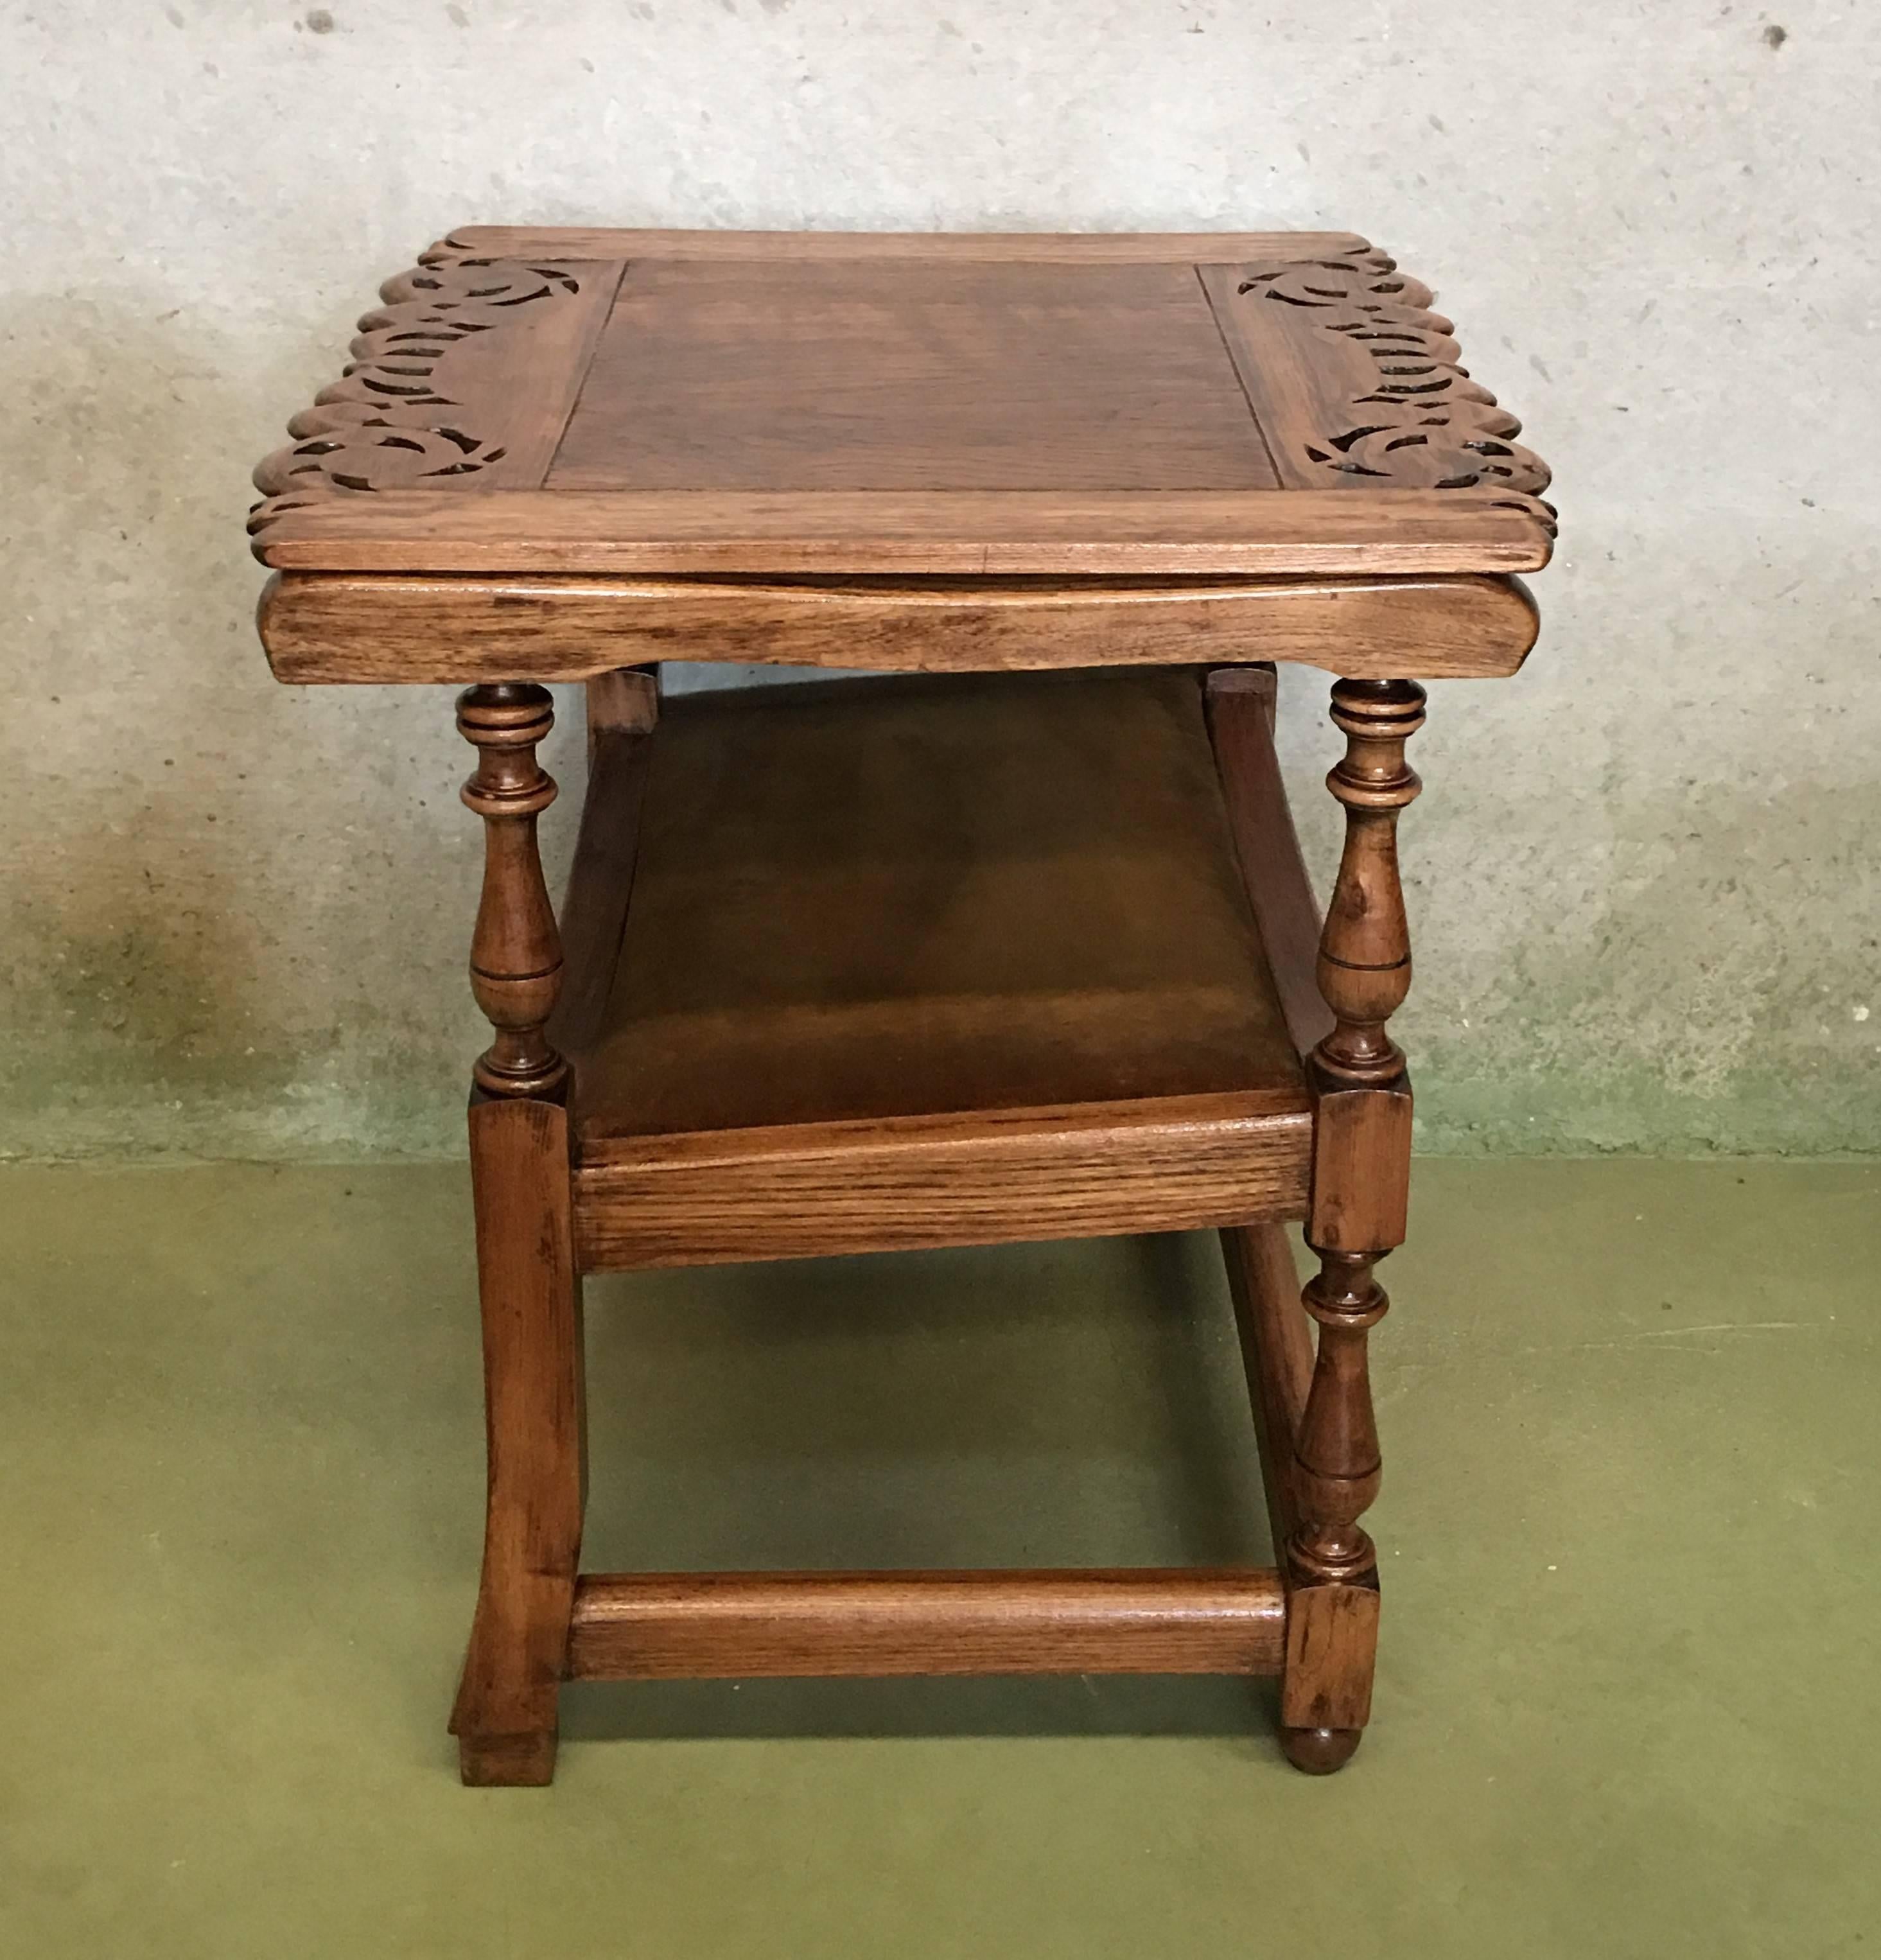 19th Century Convertible Monk's Chair or End Table. Walnut foldable Armchair 3